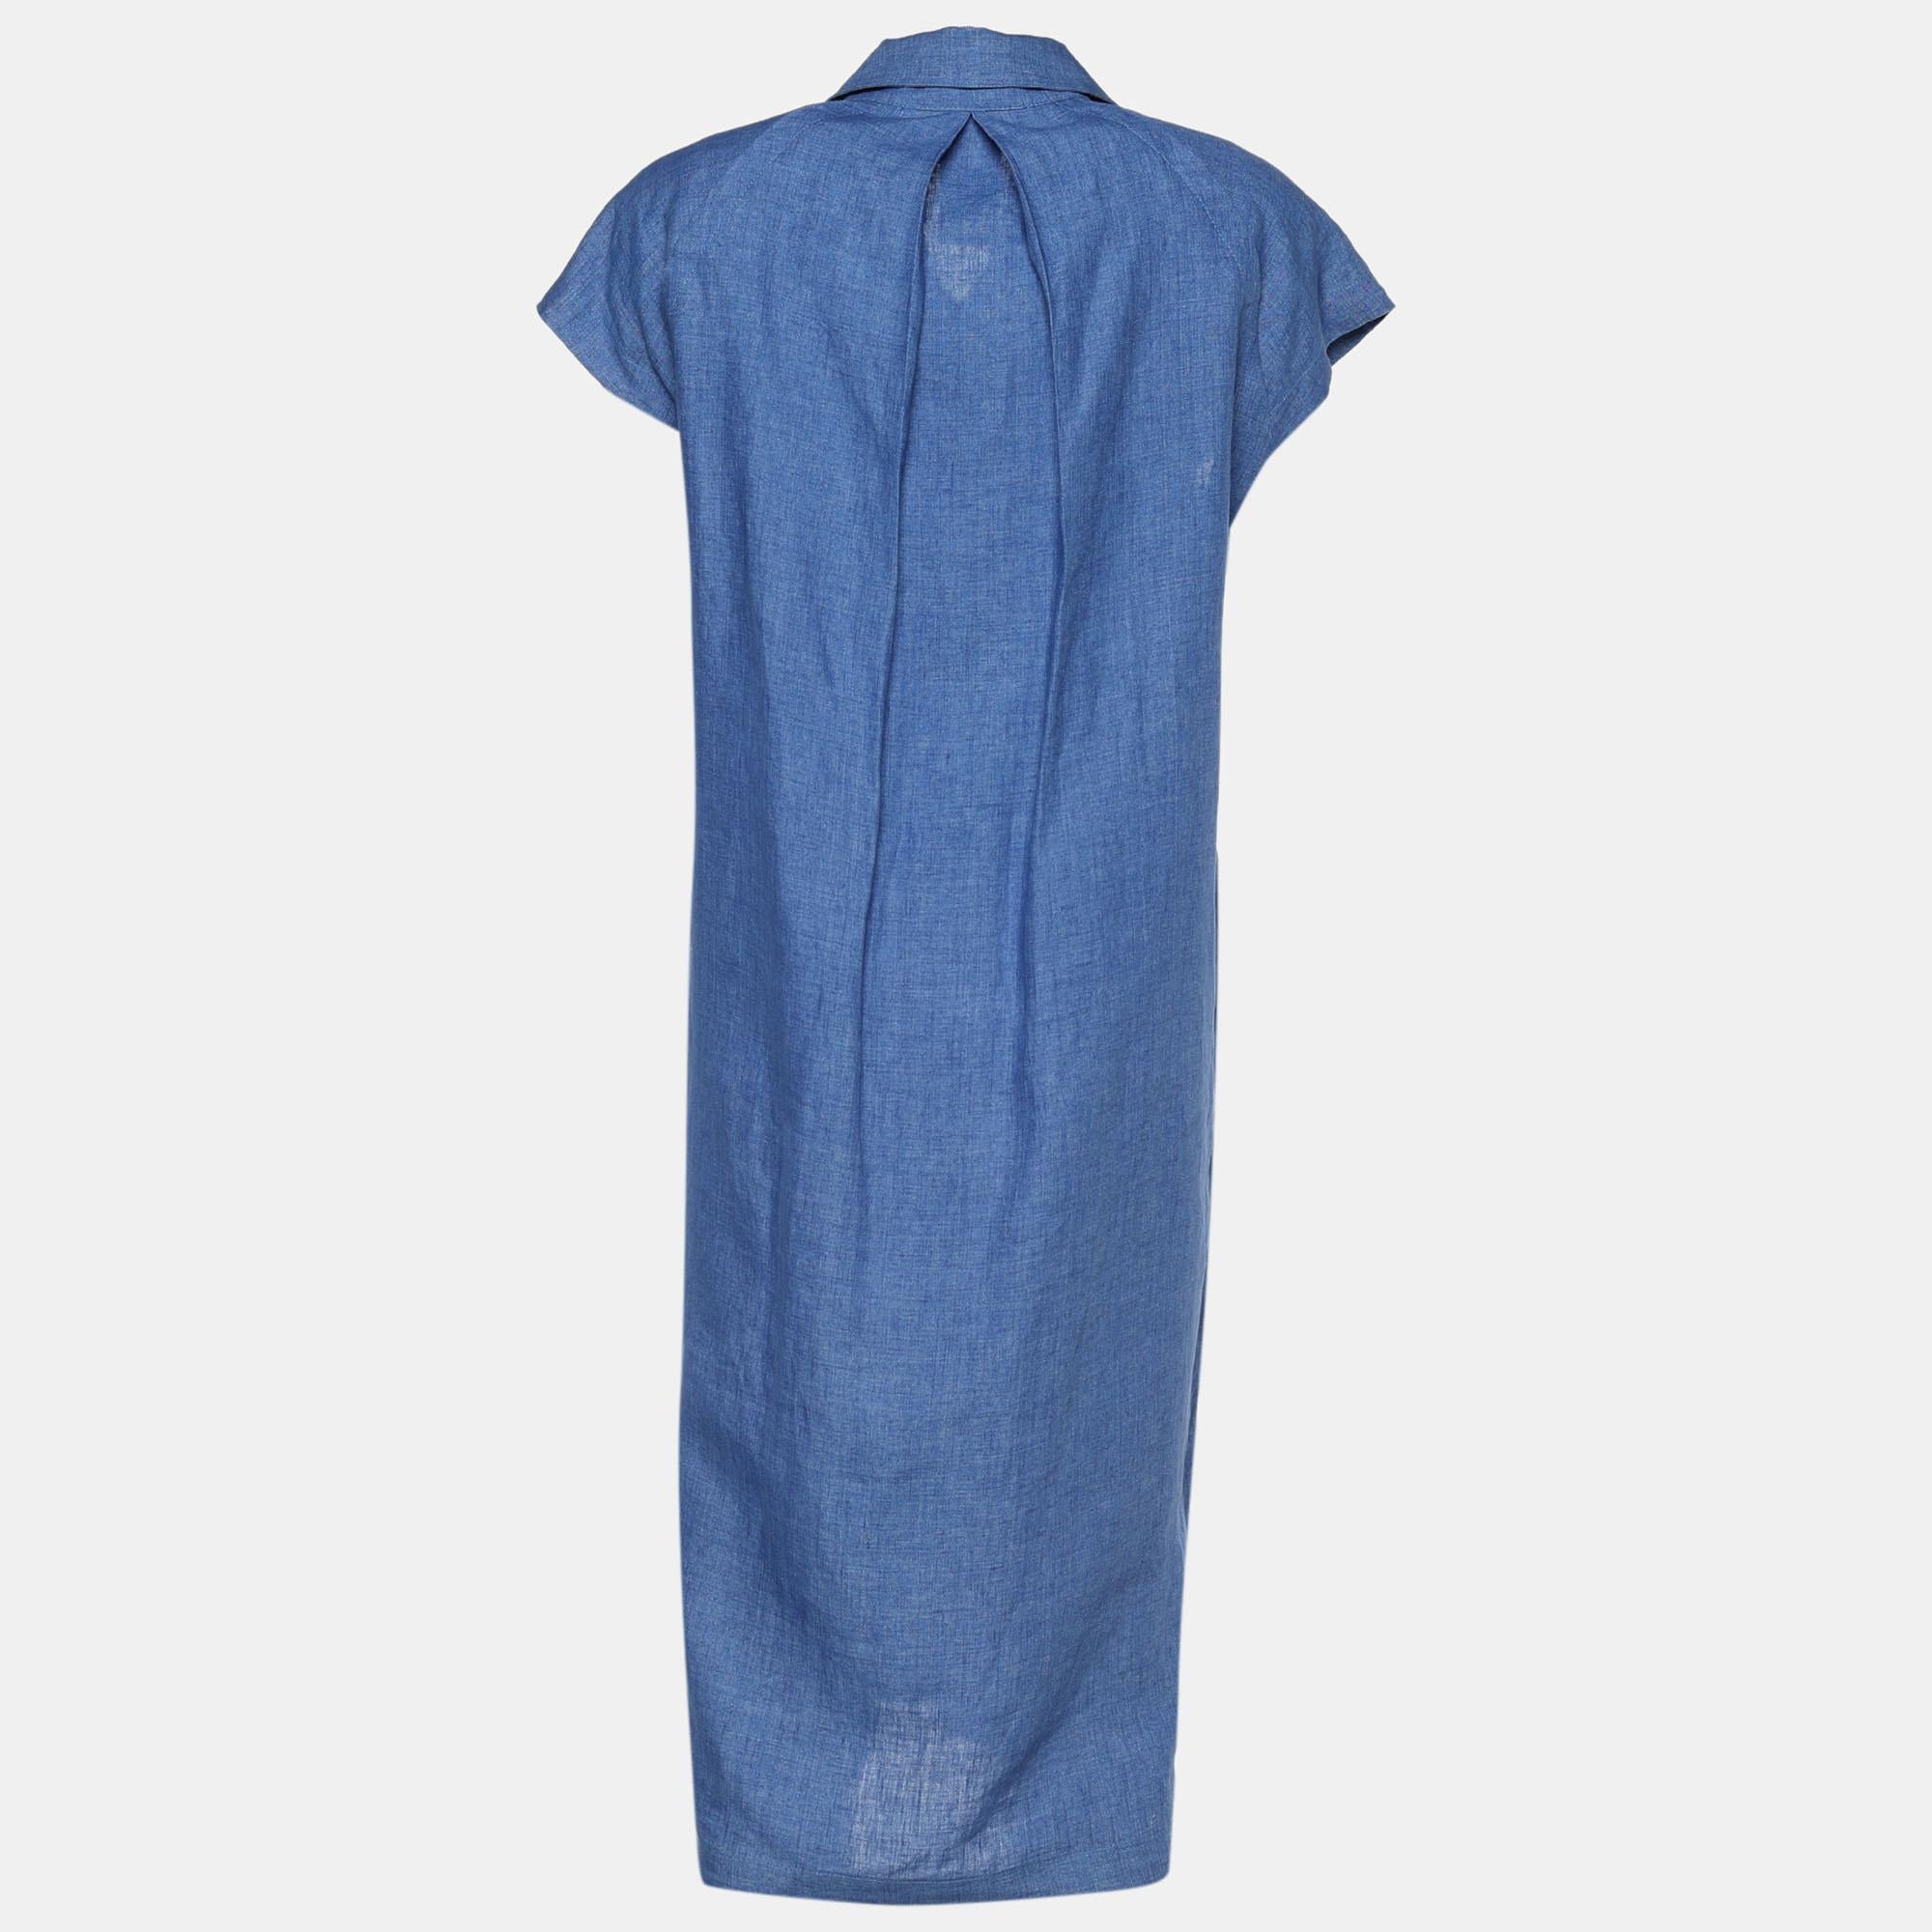 How stylish is this Max Mara tunic dress! Made from linen, this piece is truly comfy and perfect for everyday wear. The blue dress has a collar, cap sleeves, and a buttoned closure.

